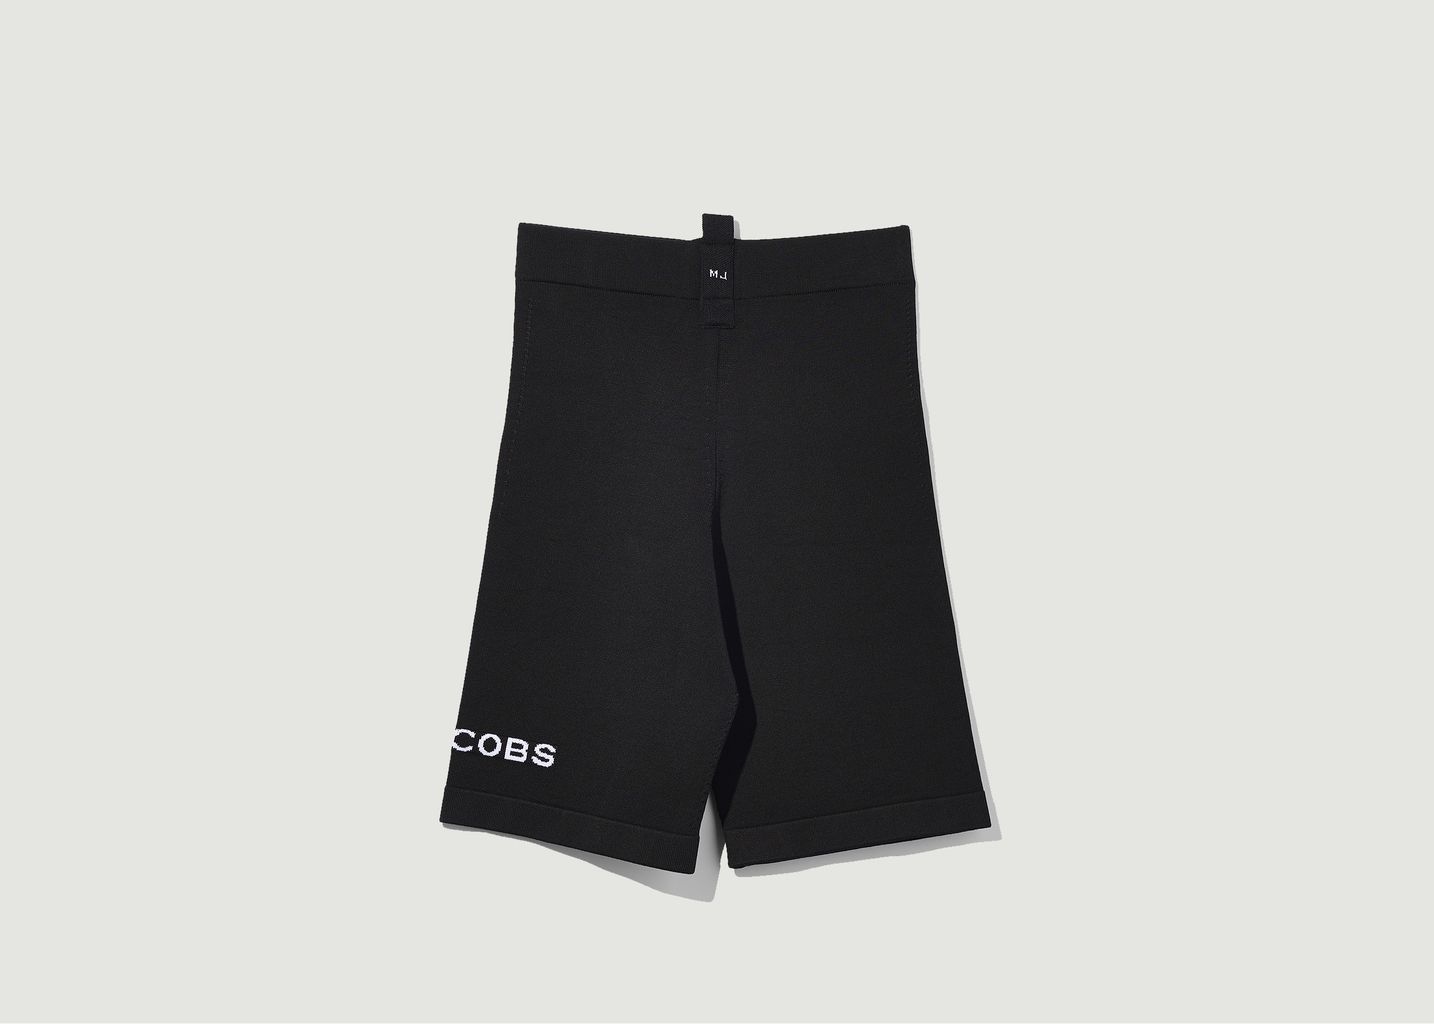 Marc Jacobs (THE) Stretchy Sport Shorts